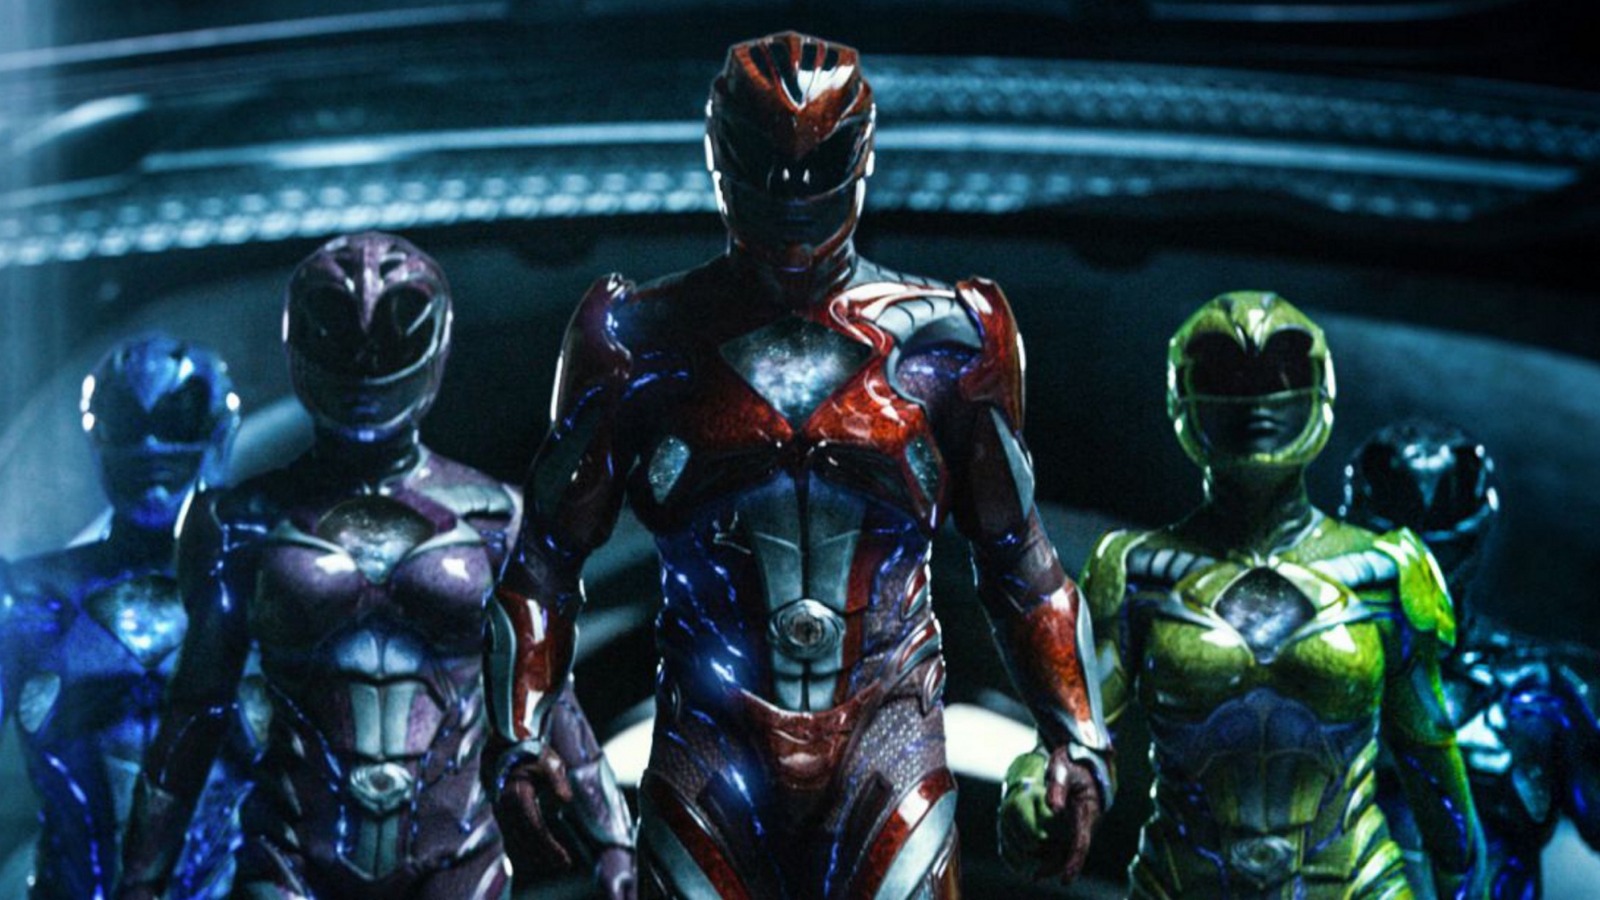 Power Rangers 2 Will We Ever Get To See The Sequel?